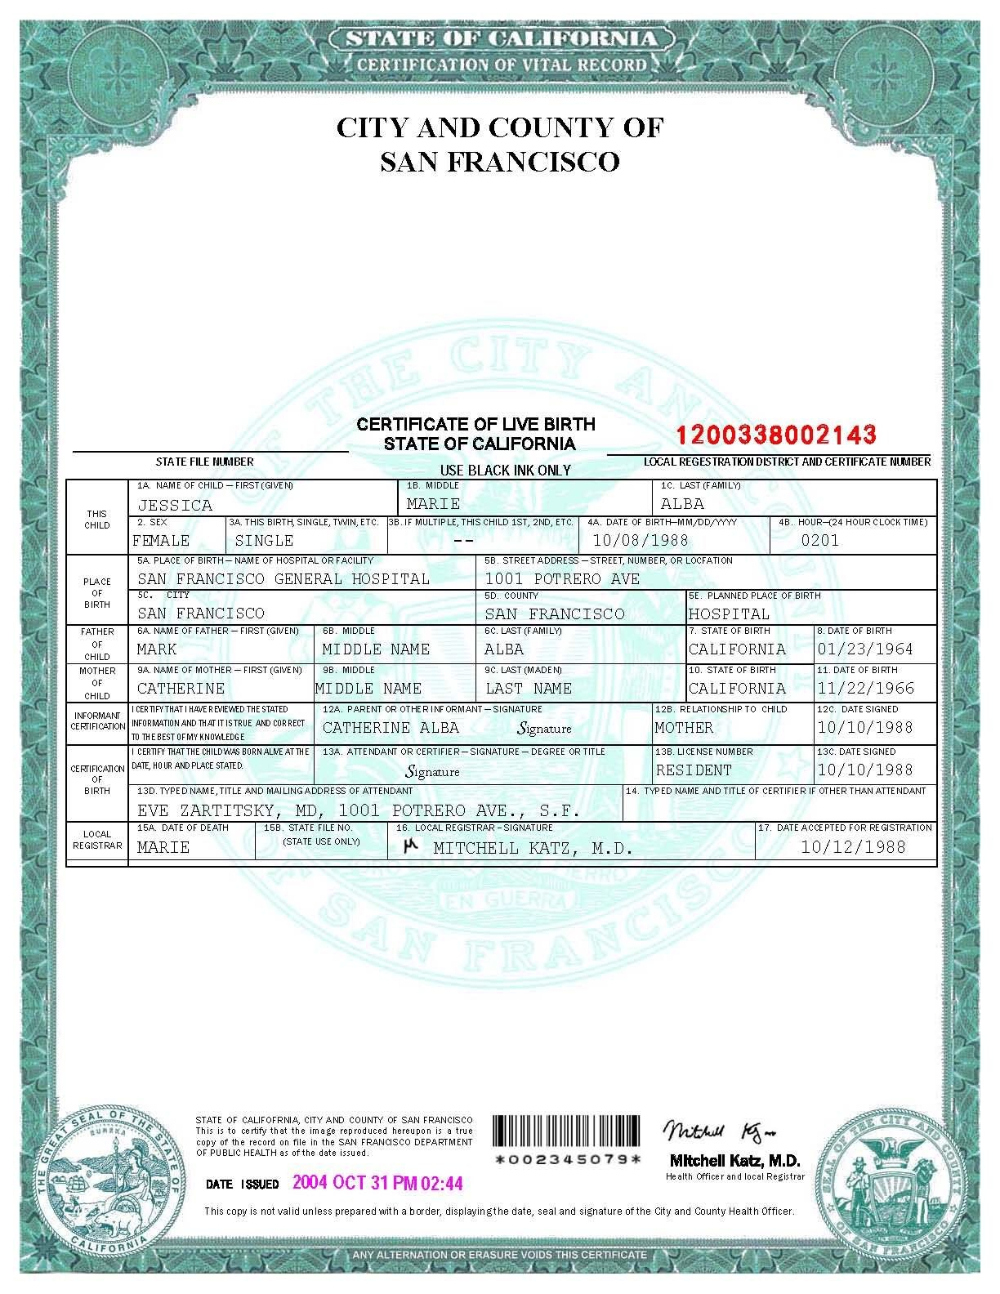 Novelty Birth Certificate Template | Fake Birth Certificate With Regard To Novelty Birth Certificate Template